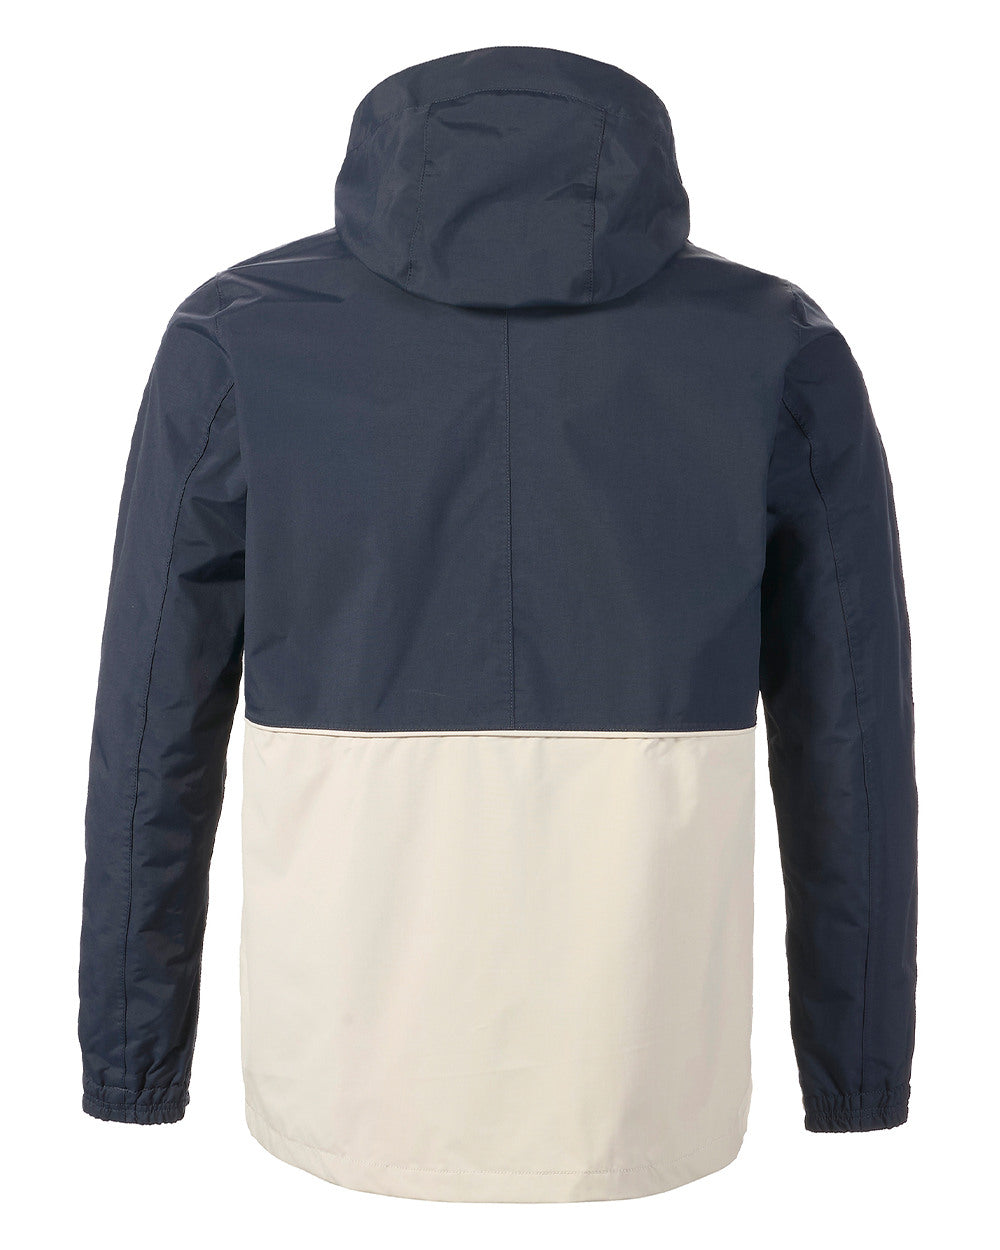 Pumice/Navy Coloured Musto Mens Classic Shore Waterproof Jacket On A White Background 